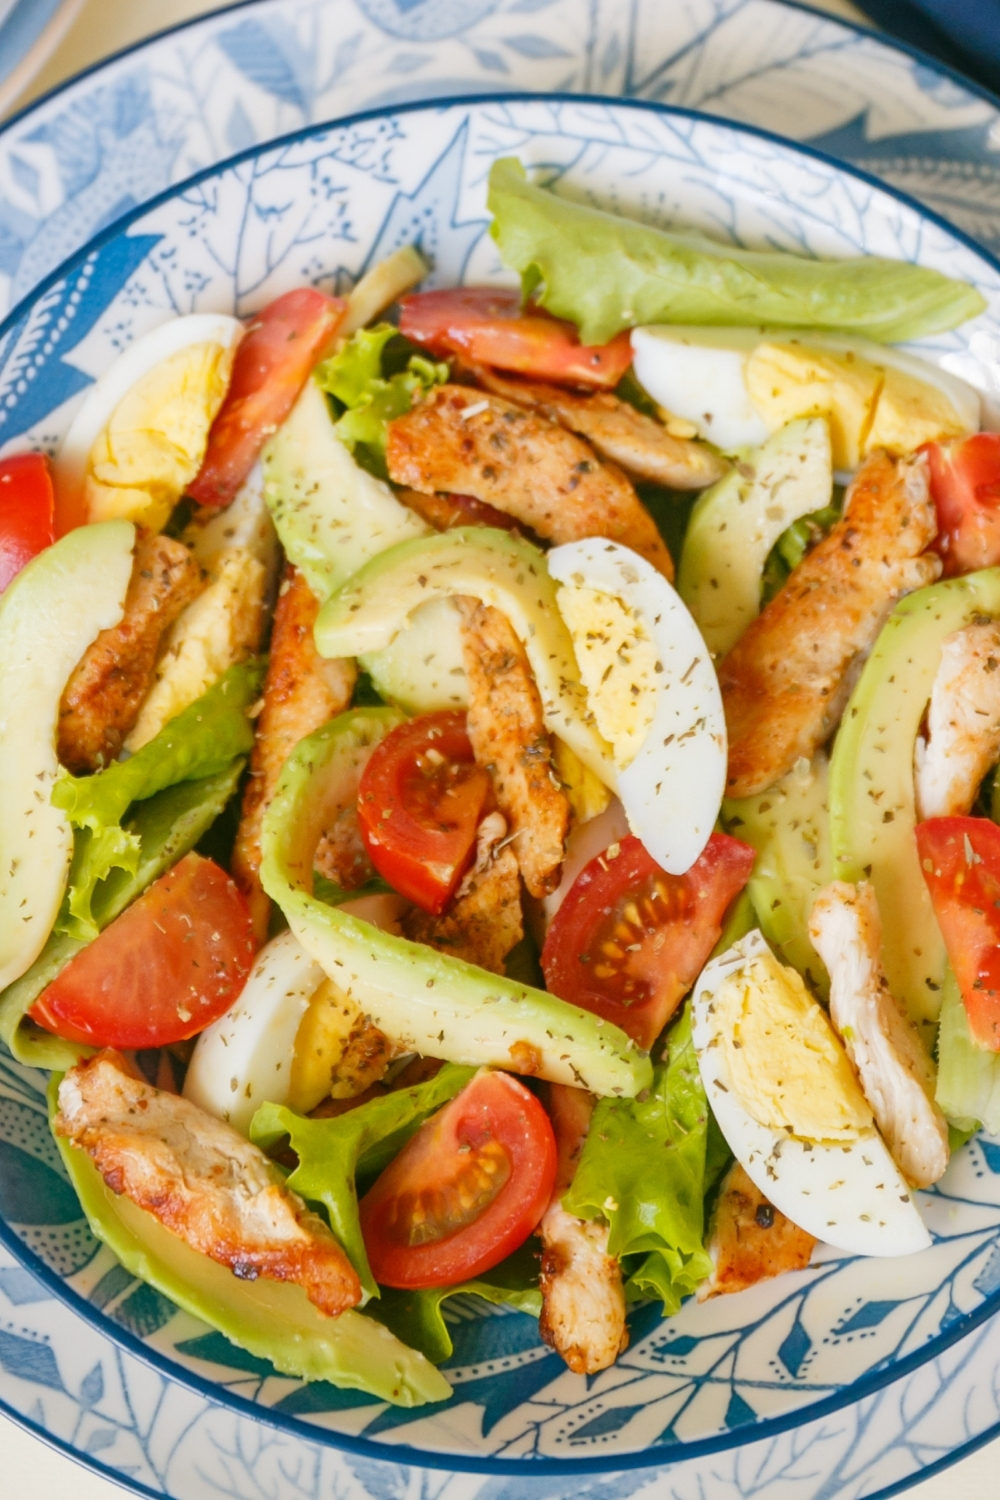 chicken salad with avocados in a blue and white bowl